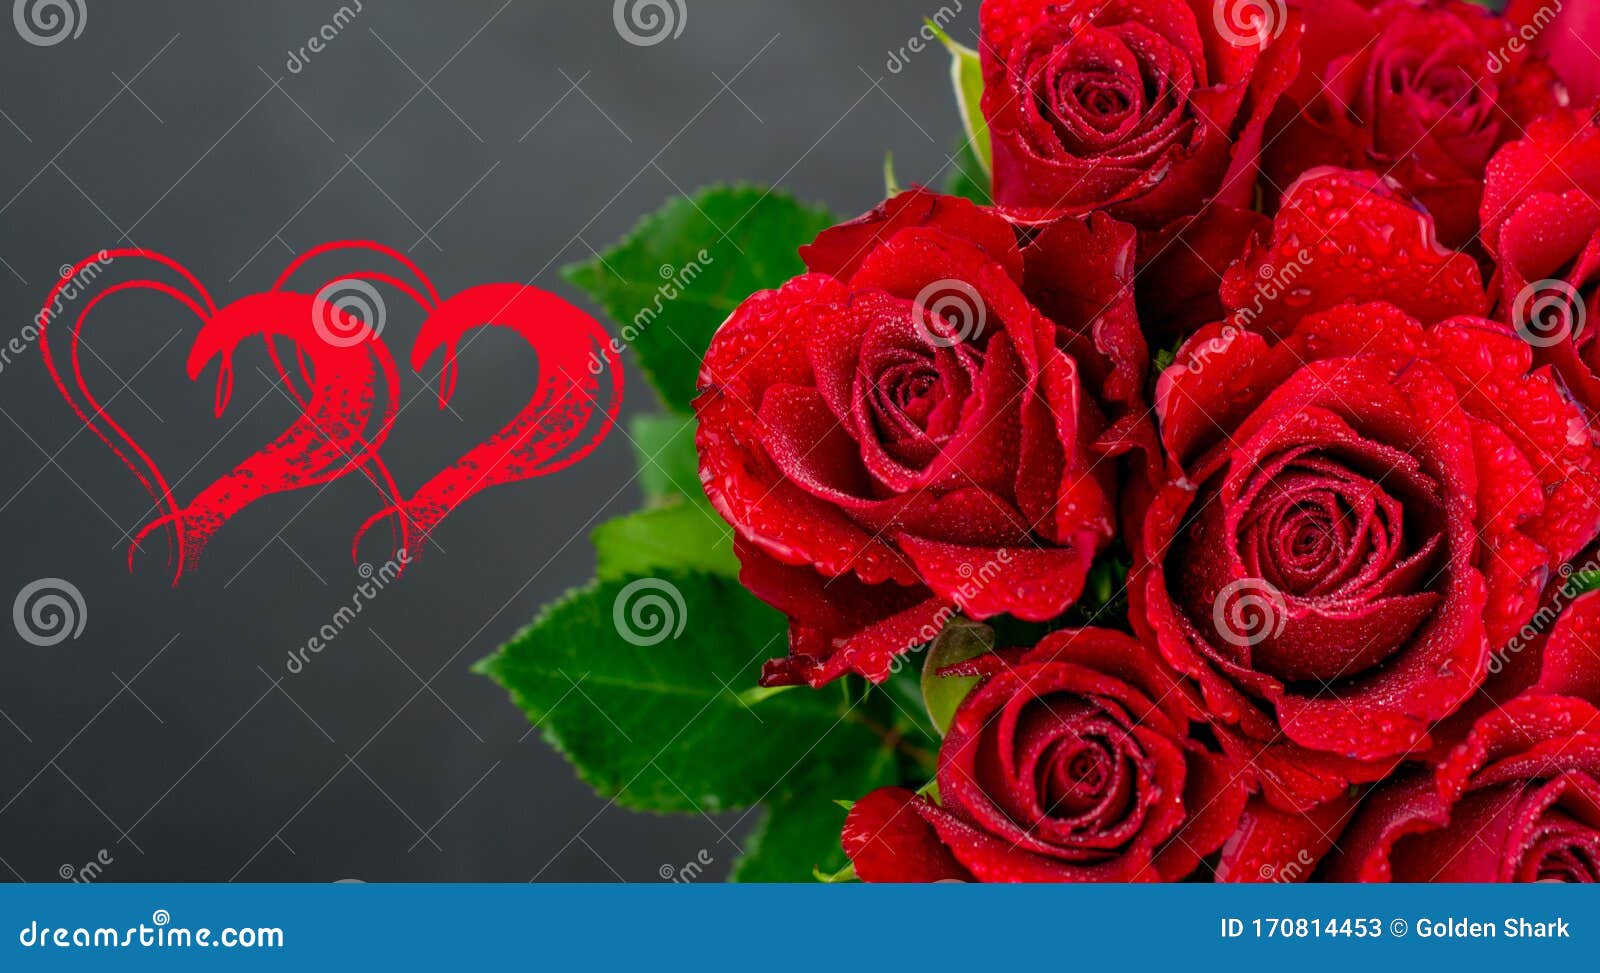 red roses on white background for valentines day